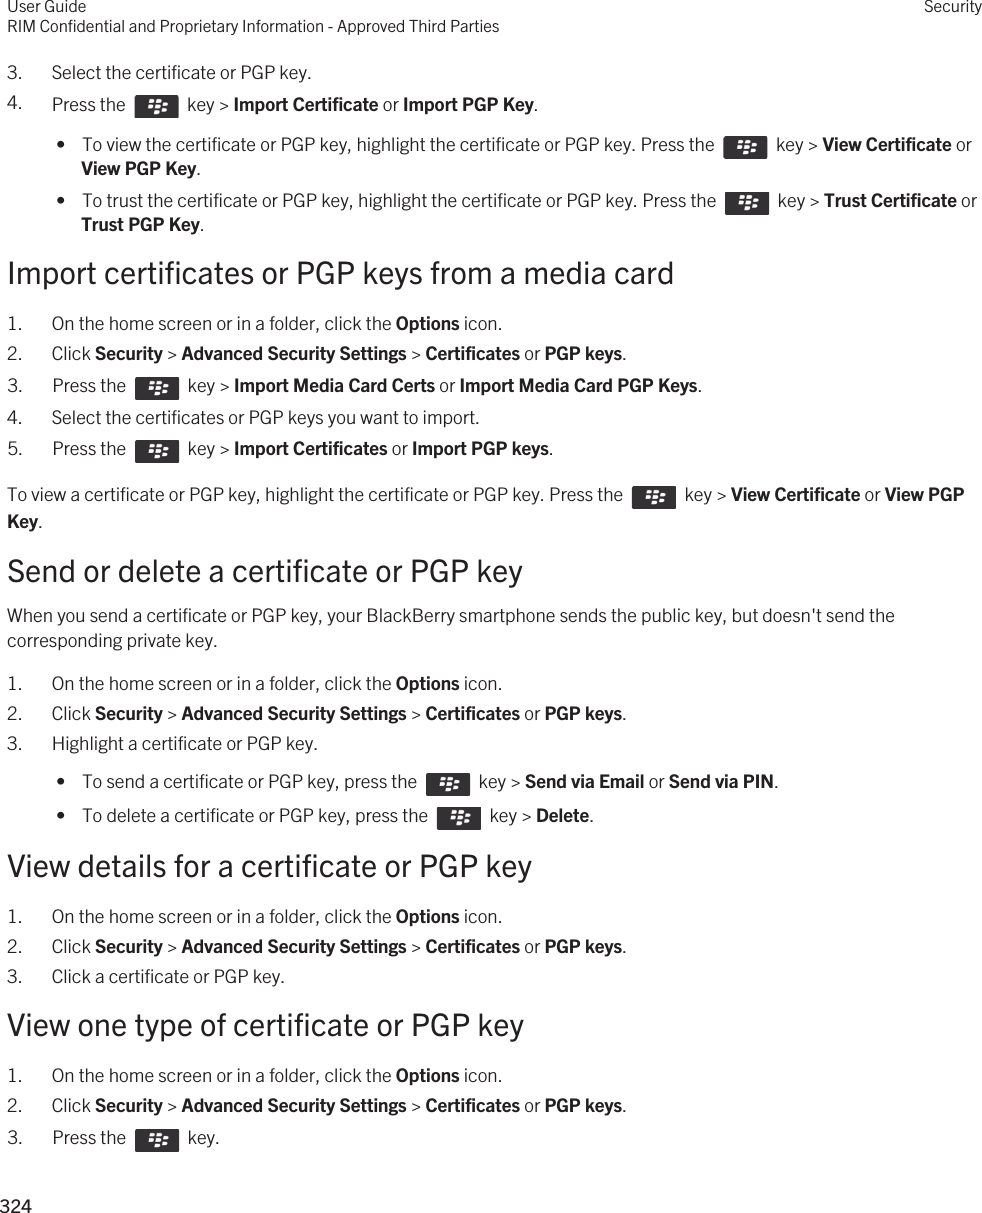 3. Select the certificate or PGP key.4. Press the    key &gt; Import Certificate or Import PGP Key.  •  To view the certificate or PGP key, highlight the certificate or PGP key. Press the    key &gt; View Certificate or View PGP Key. •  To trust the certificate or PGP key, highlight the certificate or PGP key. Press the    key &gt; Trust Certificate or Trust PGP Key.Import certificates or PGP keys from a media card1. On the home screen or in a folder, click the Options icon.2. Click Security &gt; Advanced Security Settings &gt; Certificates or PGP keys.3.  Press the    key &gt; Import Media Card Certs or Import Media Card PGP Keys.4. Select the certificates or PGP keys you want to import.5.  Press the    key &gt; Import Certificates or Import PGP keys.To view a certificate or PGP key, highlight the certificate or PGP key. Press the    key &gt; View Certificate or View PGP Key.Send or delete a certificate or PGP keyWhen you send a certificate or PGP key, your BlackBerry smartphone sends the public key, but doesn&apos;t send the corresponding private key.1. On the home screen or in a folder, click the Options icon.2. Click Security &gt; Advanced Security Settings &gt; Certificates or PGP keys.3. Highlight a certificate or PGP key. •  To send a certificate or PGP key, press the    key &gt; Send via Email or Send via PIN. •  To delete a certificate or PGP key, press the    key &gt; Delete.View details for a certificate or PGP key1. On the home screen or in a folder, click the Options icon.2. Click Security &gt; Advanced Security Settings &gt; Certificates or PGP keys.3. Click a certificate or PGP key.View one type of certificate or PGP key1. On the home screen or in a folder, click the Options icon.2. Click Security &gt; Advanced Security Settings &gt; Certificates or PGP keys.3.  Press the    key. User GuideRIM Confidential and Proprietary Information - Approved Third PartiesSecurity324 